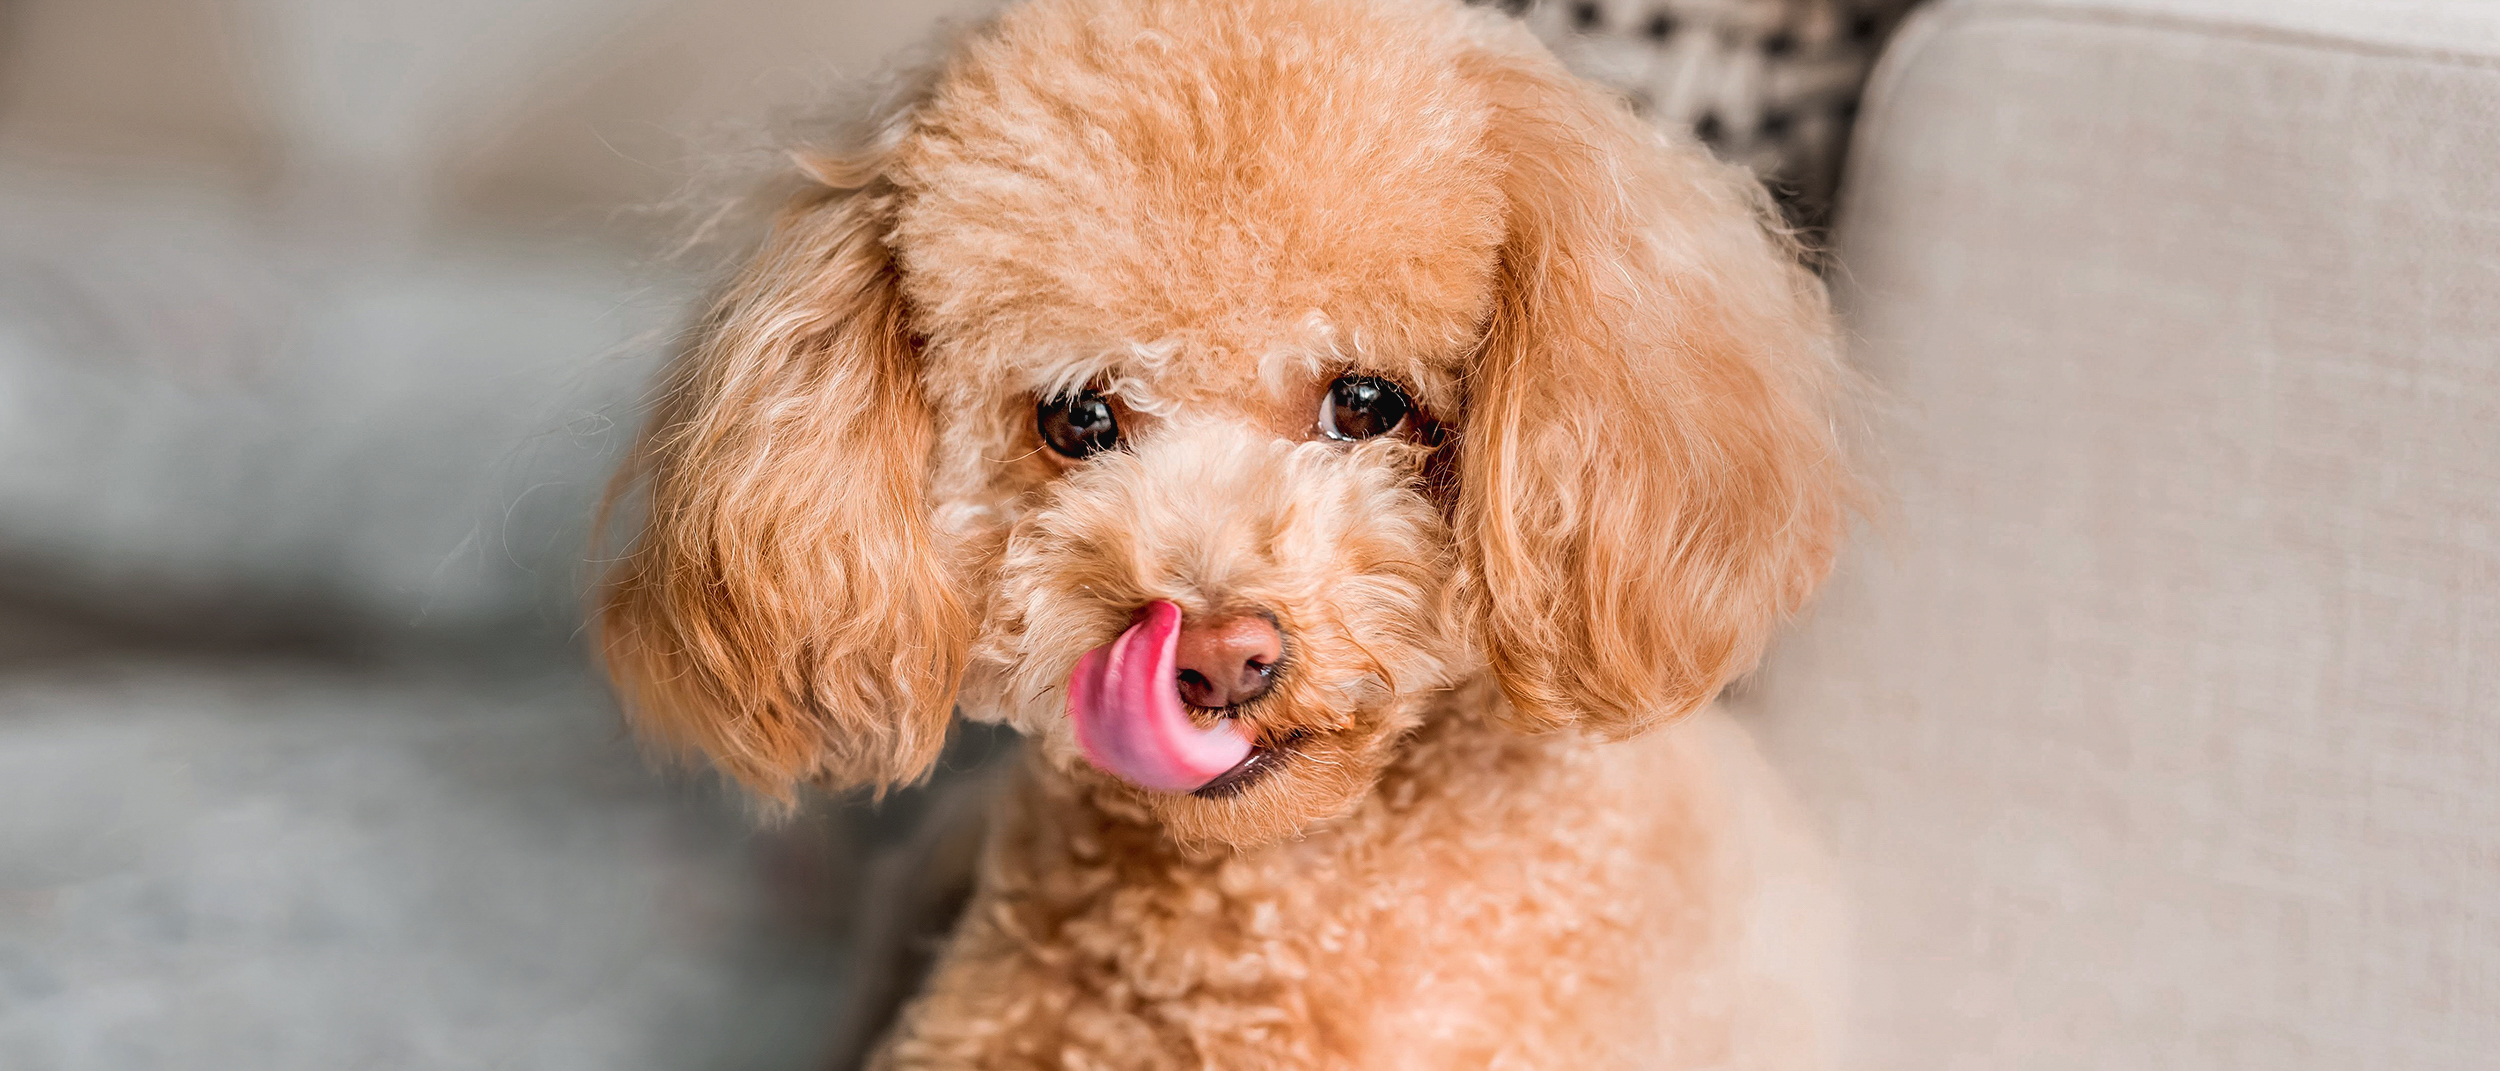 Adult Poodle lying down on a sofa licking its lips.